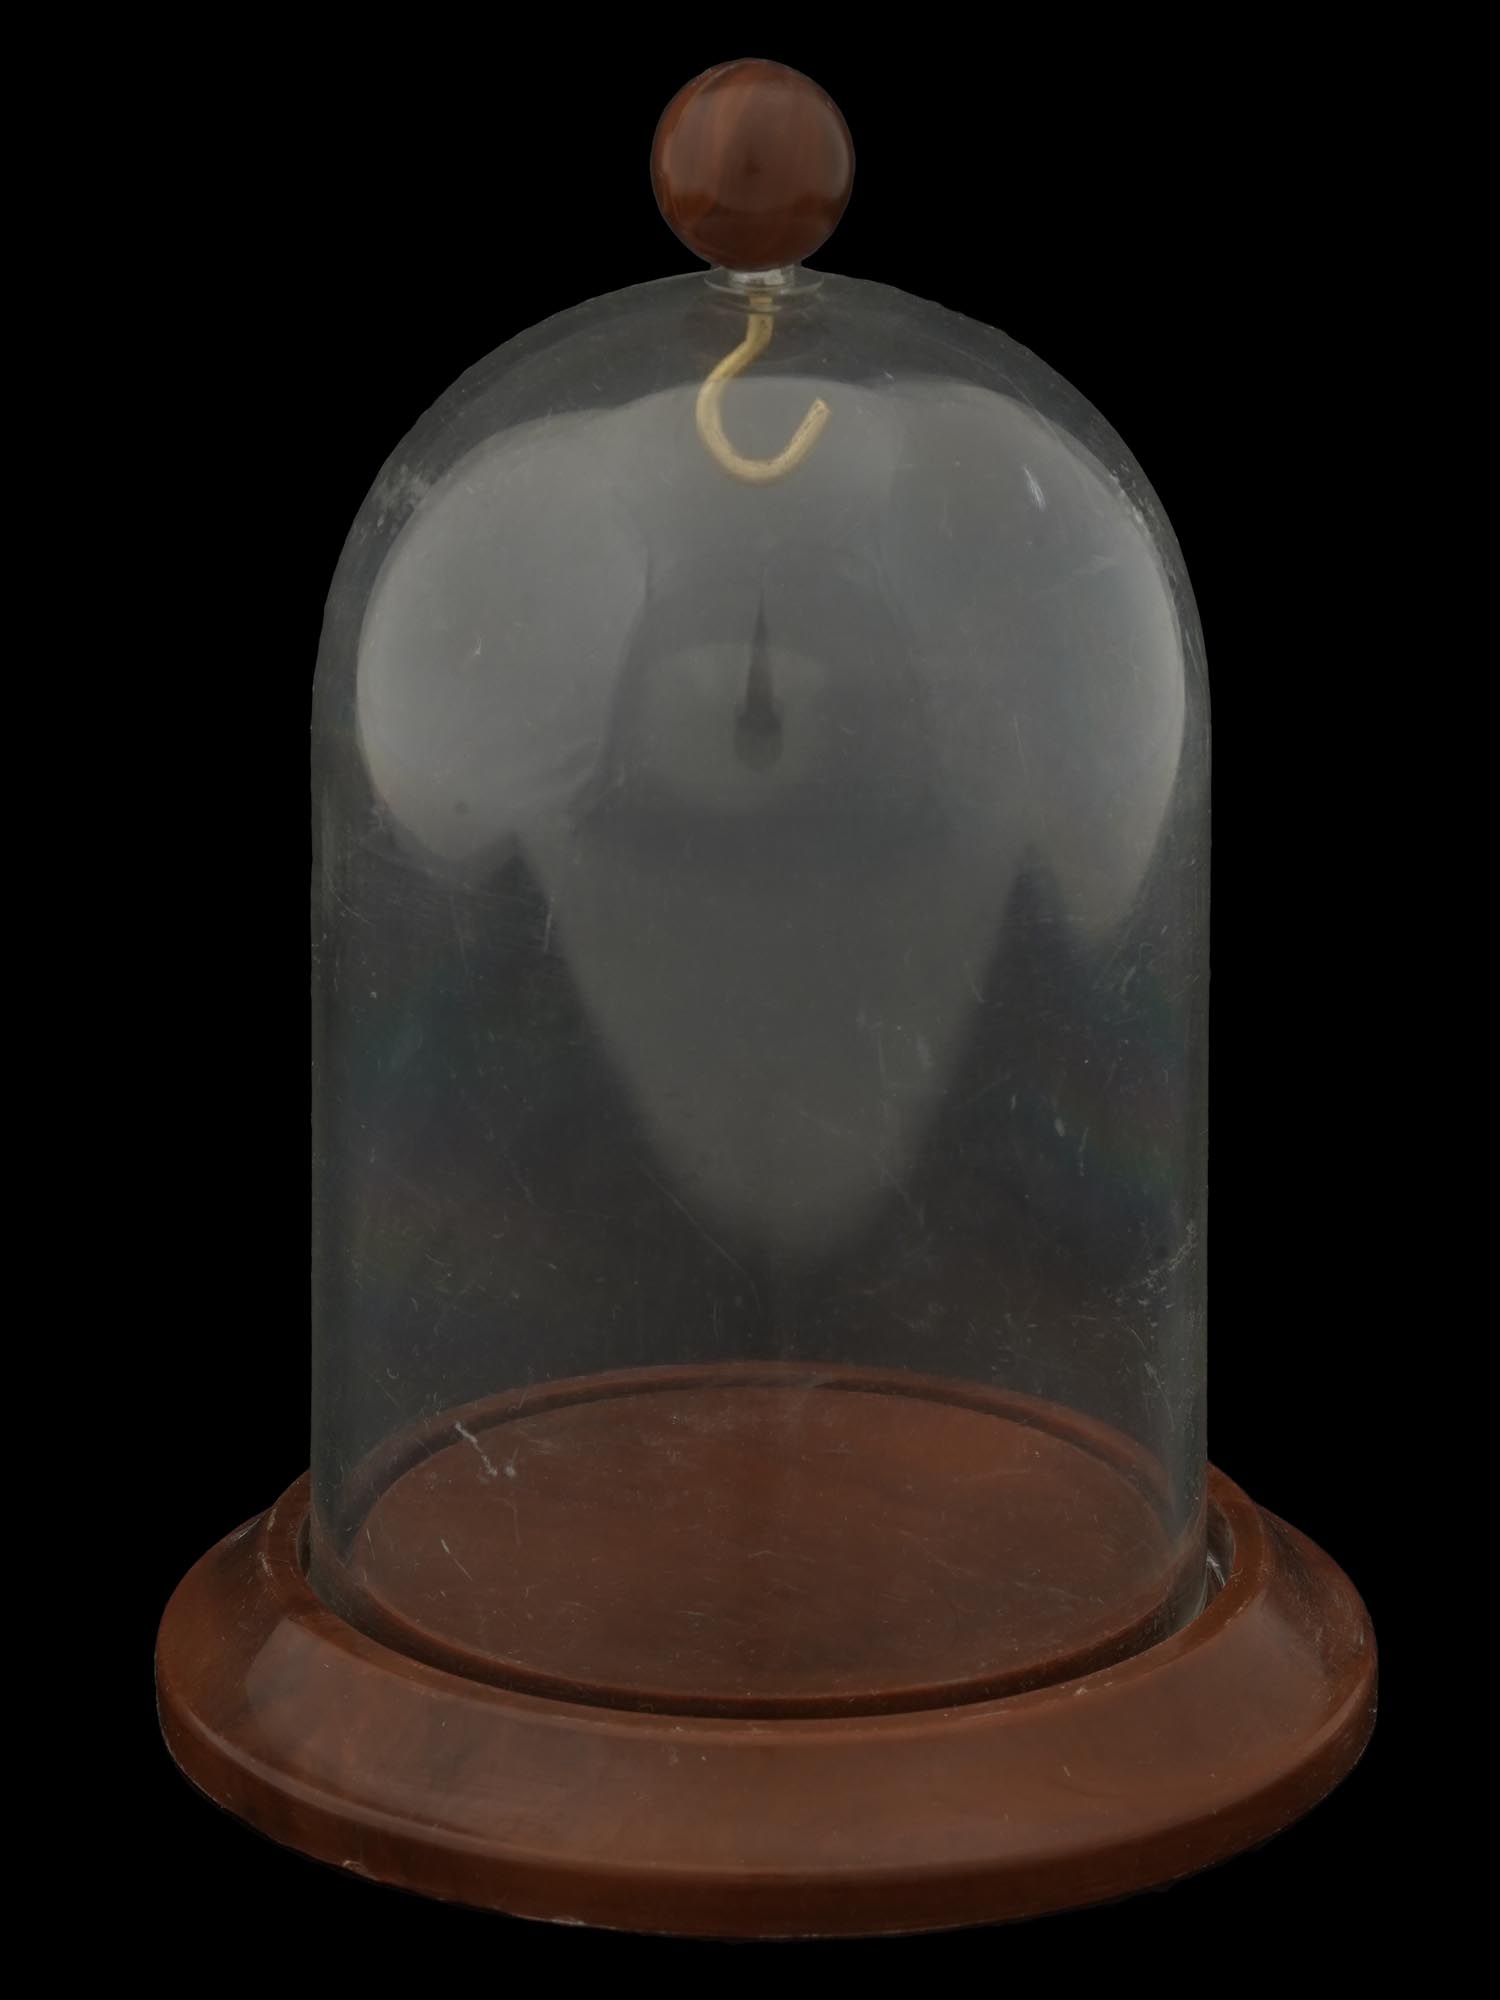 KOMA 400 DAY MANTLE CLOCK UNDER DOME AND SMALL DOME PIC-6